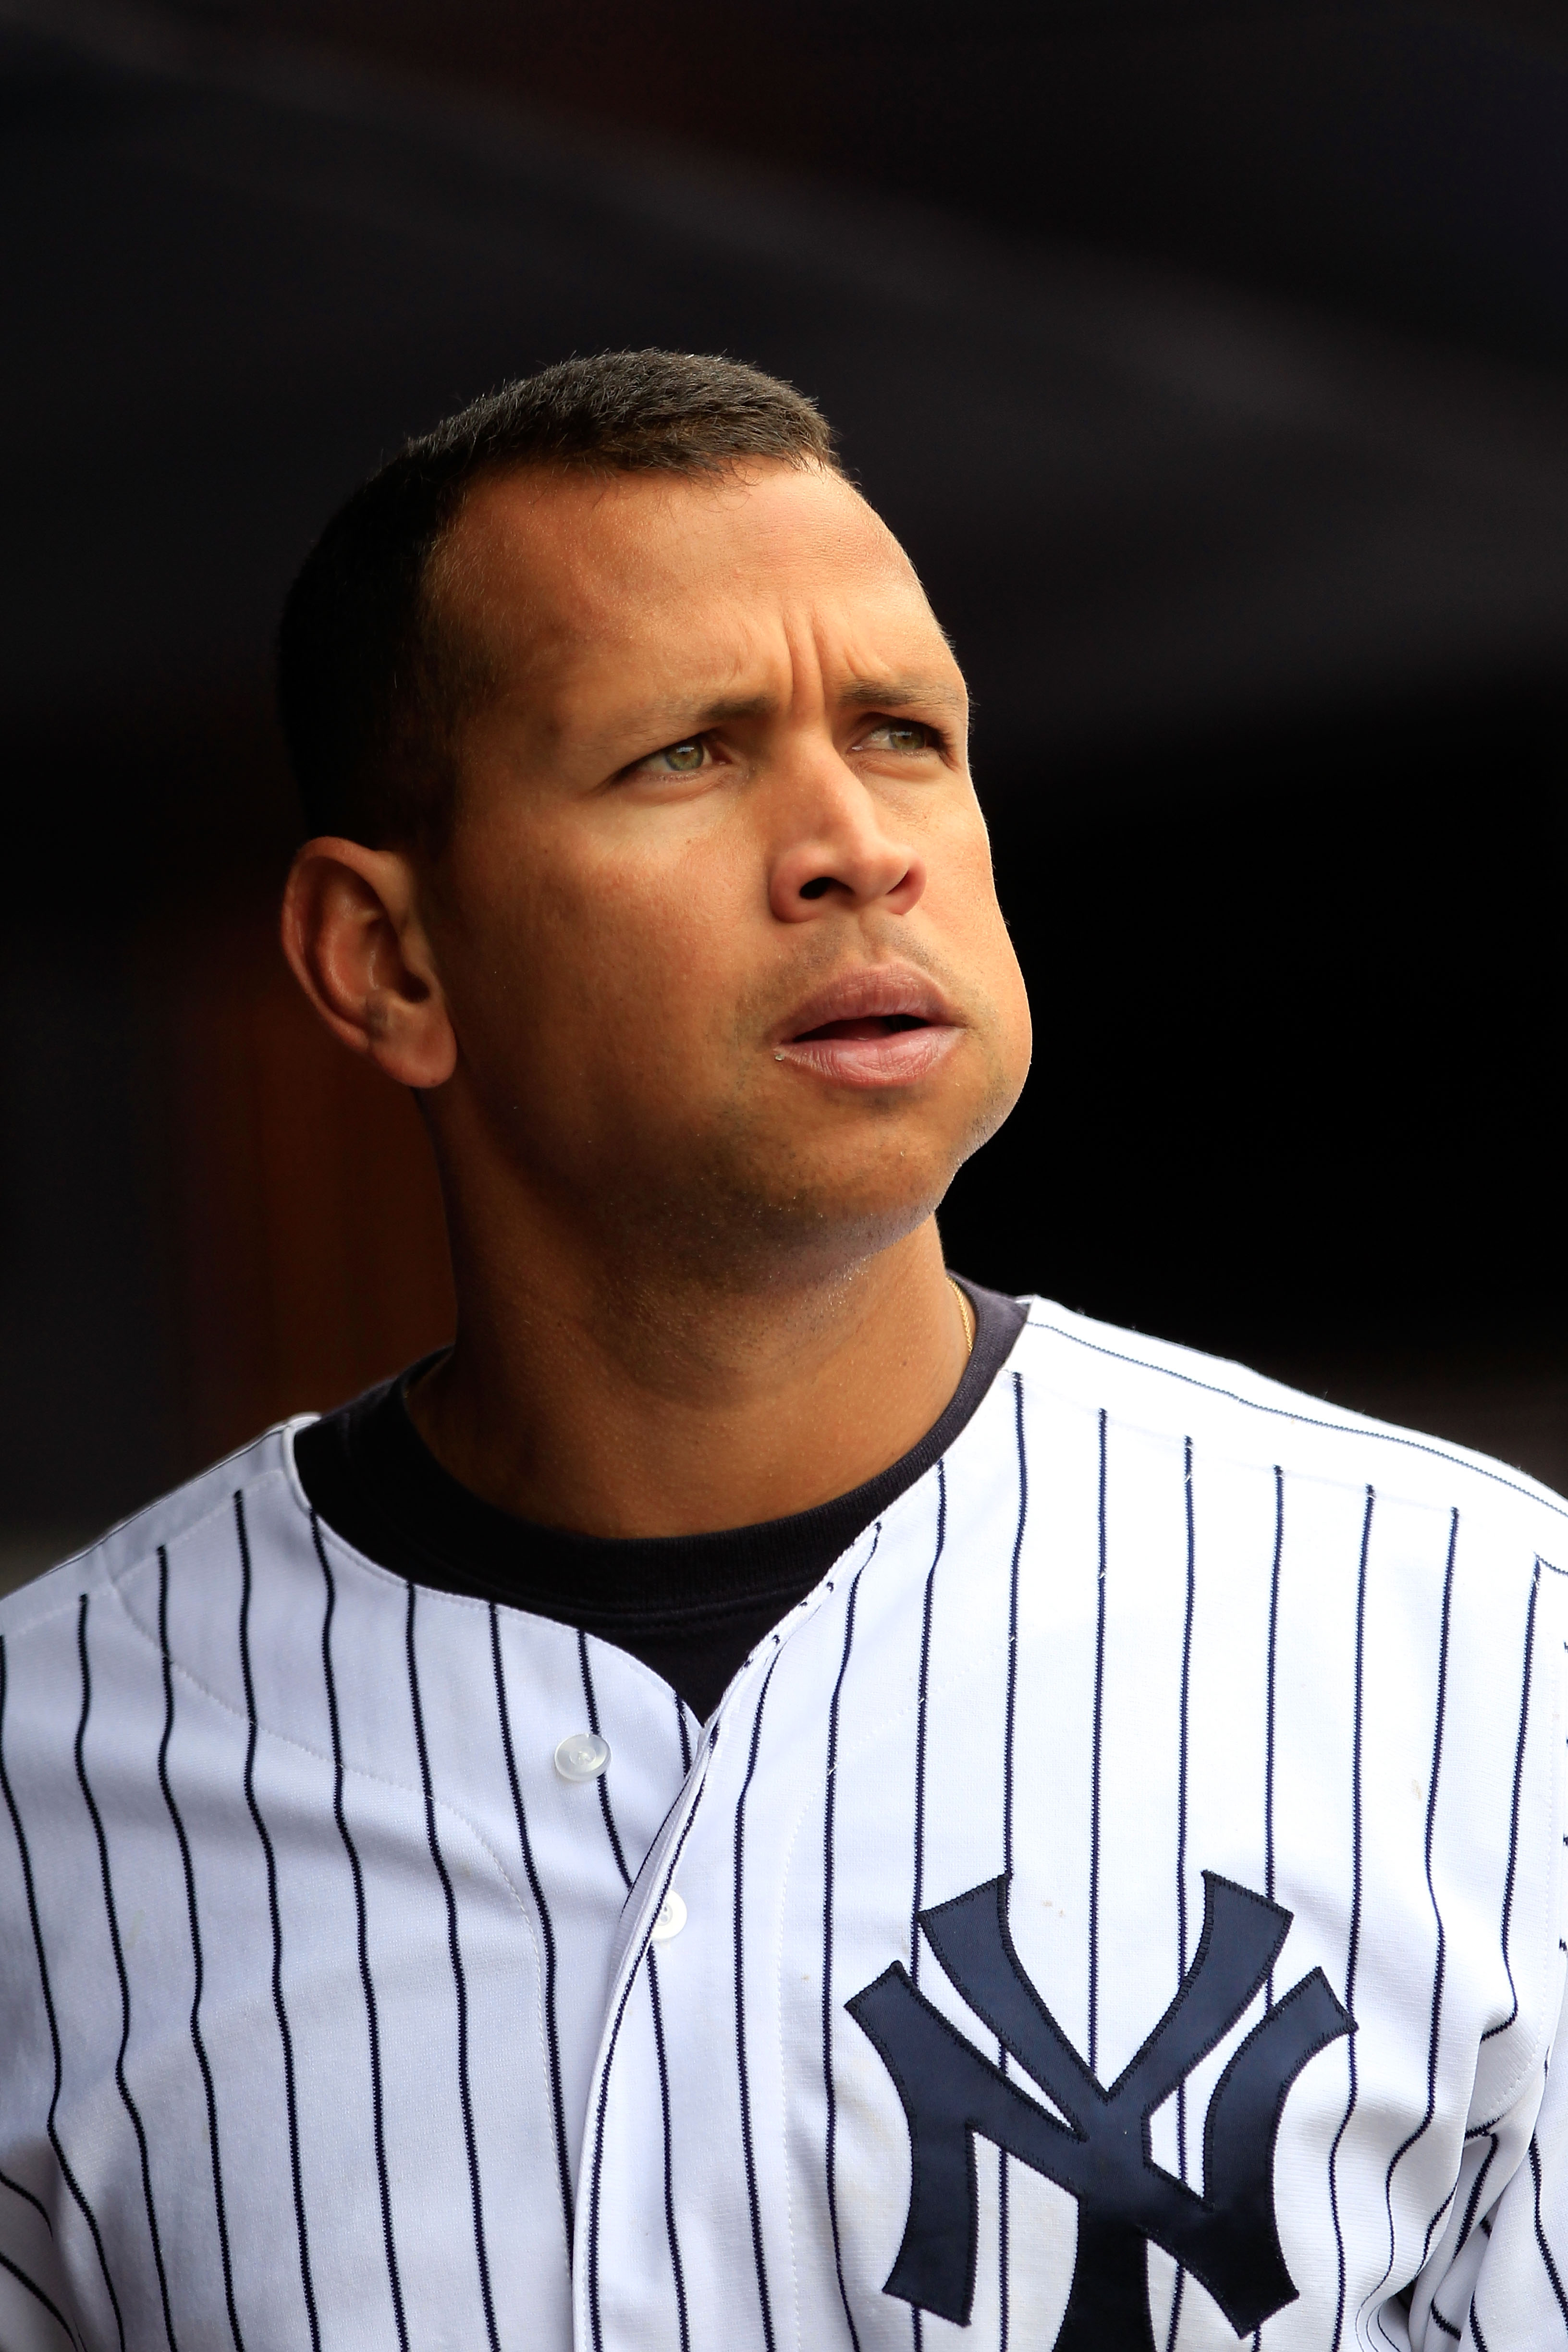 NEW YORK, NY - MAY 01:  Alex Rodriguez #13 of the New York Yankees looks on from the dugout during the game against the Toronto Blue Jays at Yankee Stadium on May 1, 2011 in the Bronx borough of New York City. The Yankees defeated the Blue Jays 5-2.  (Pho